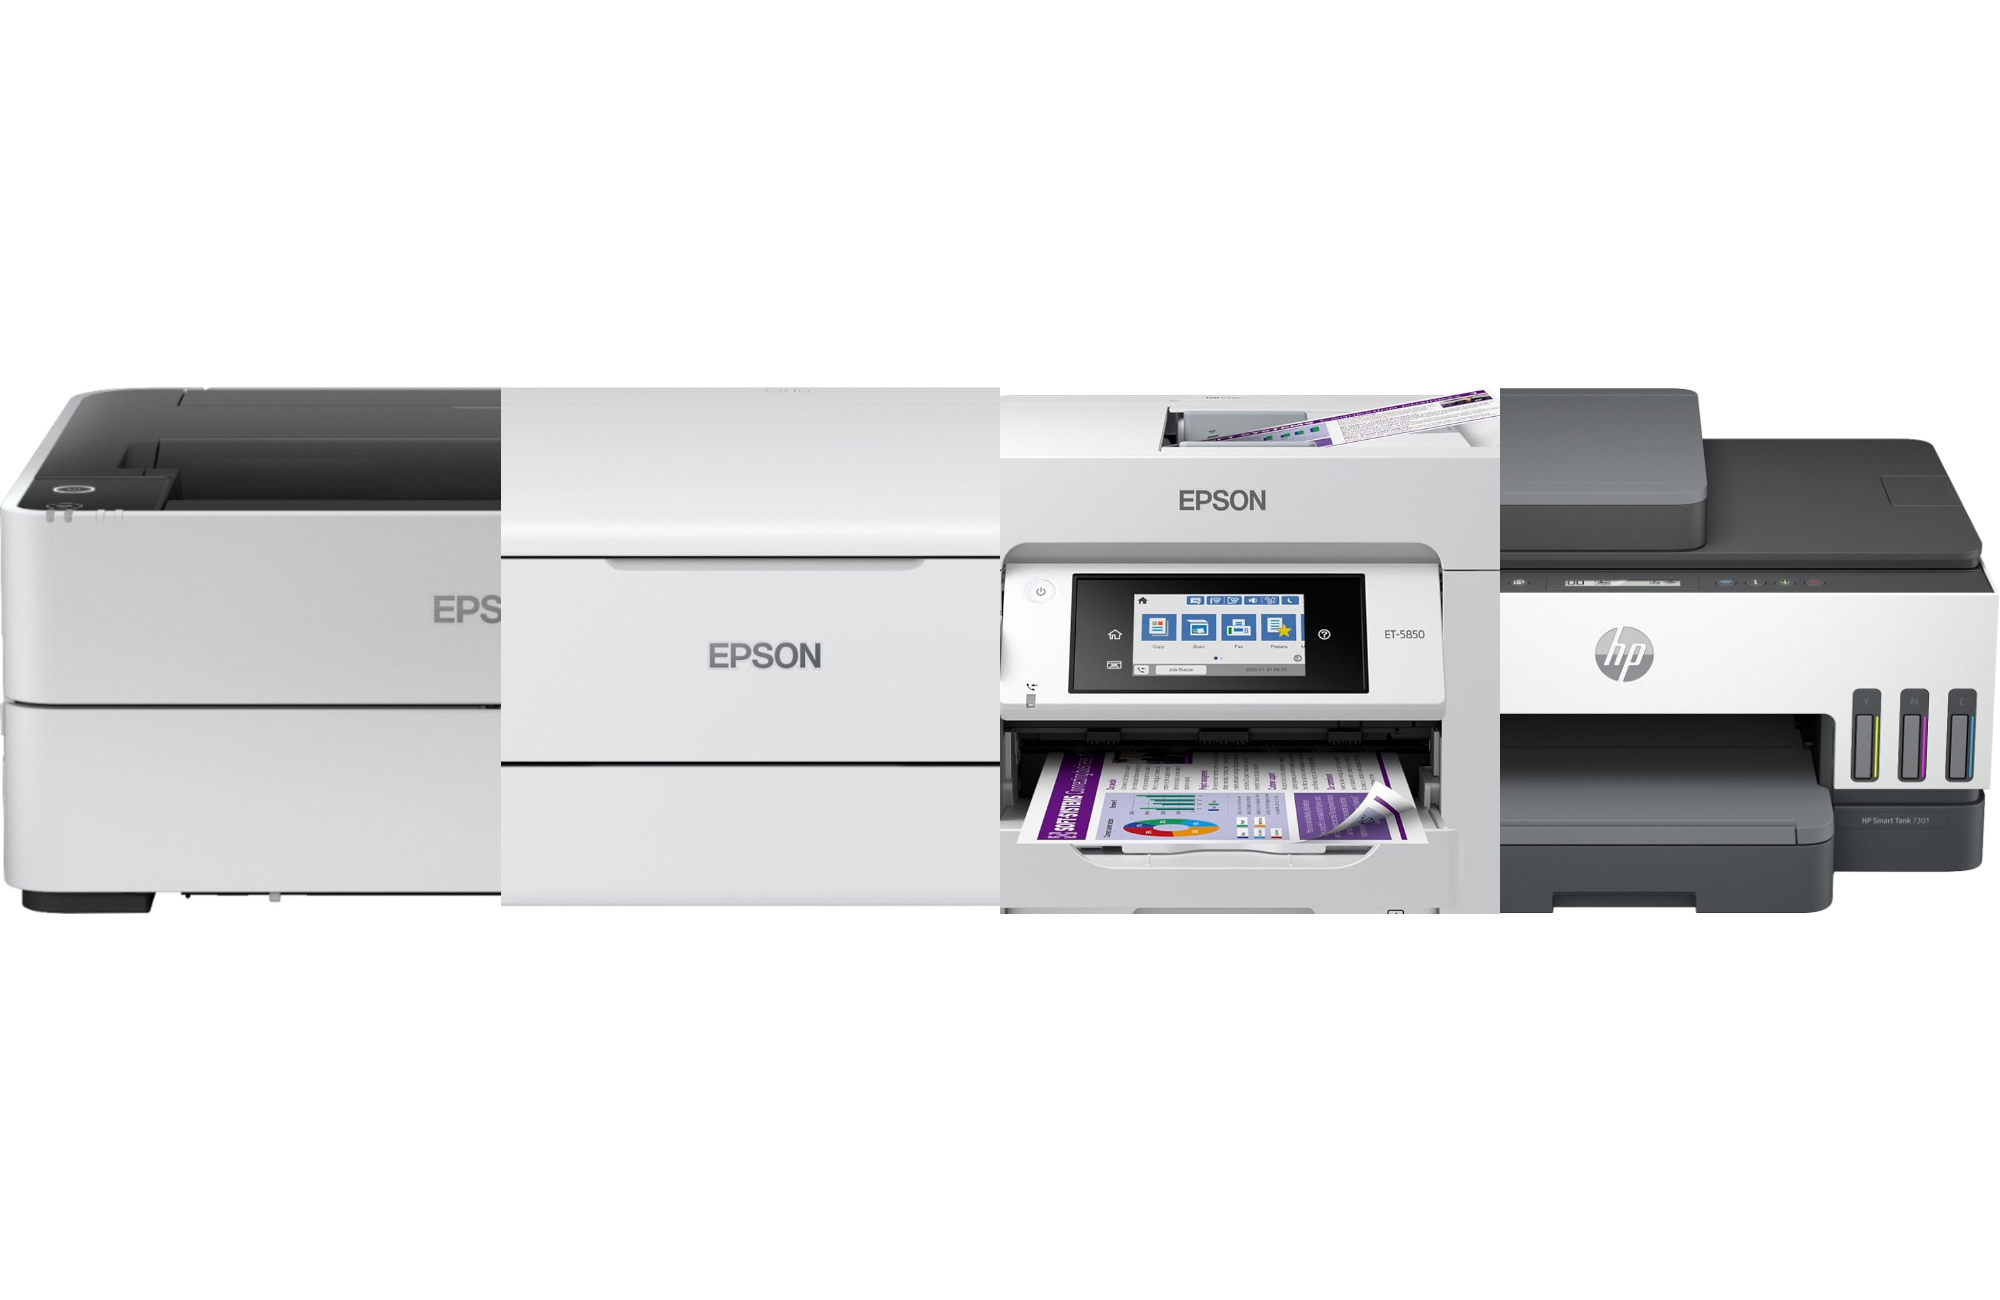 7 of the best small printers for making paper copies at home